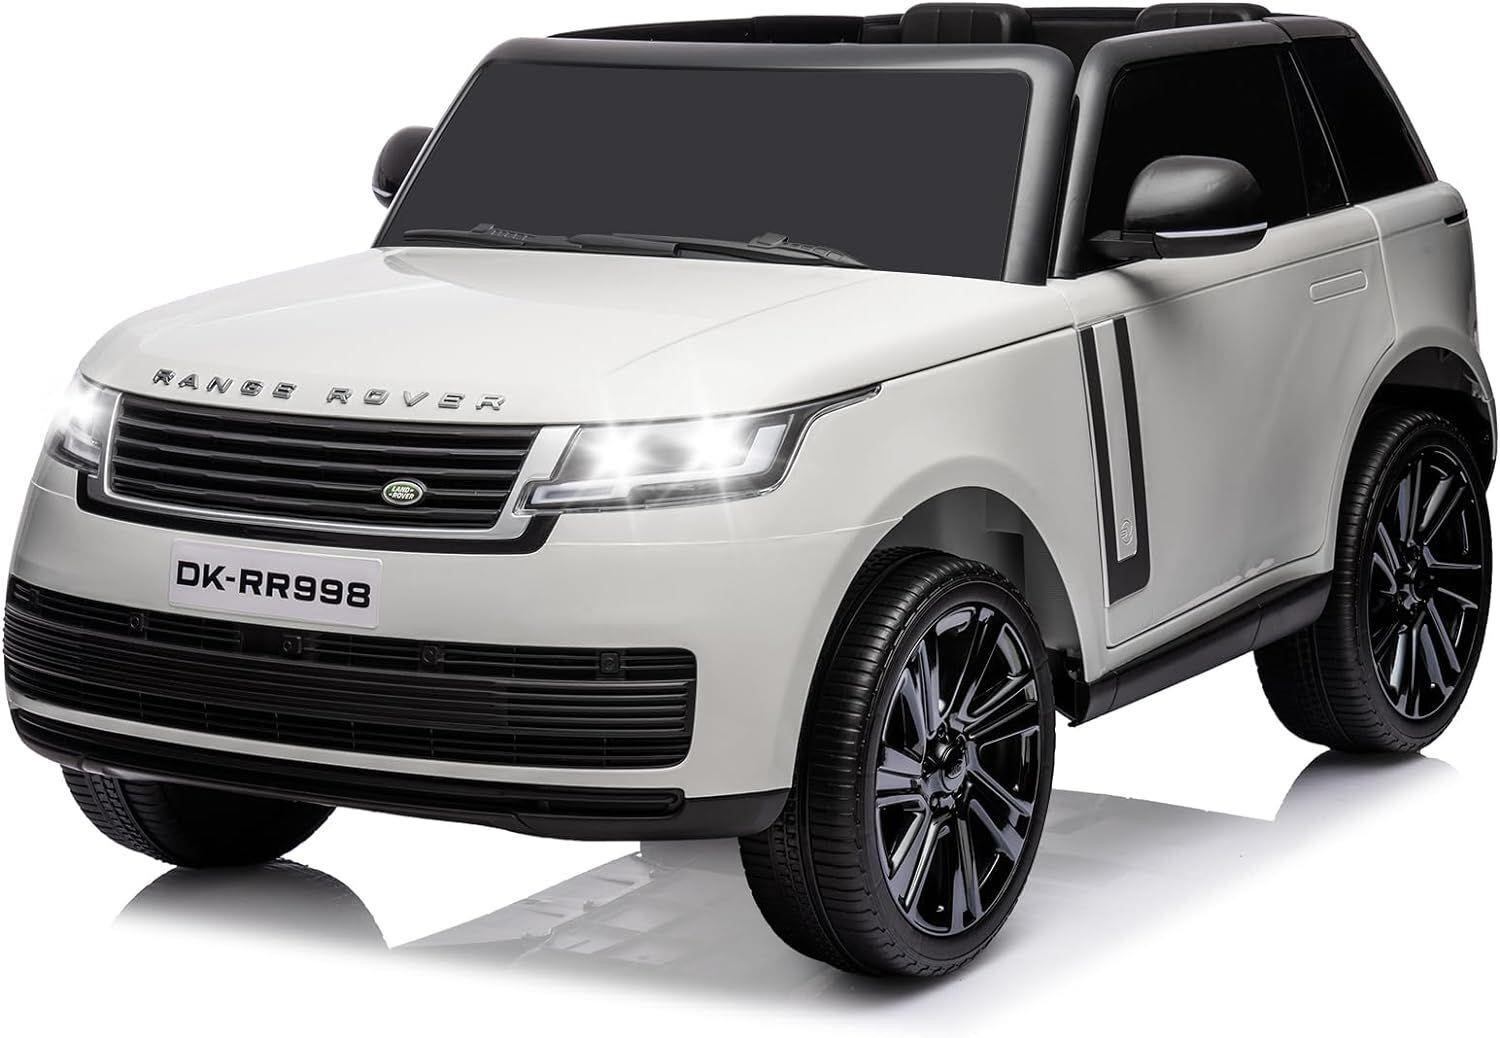 24V 2-Seater Licensed Land Rover Ride On Car Toy